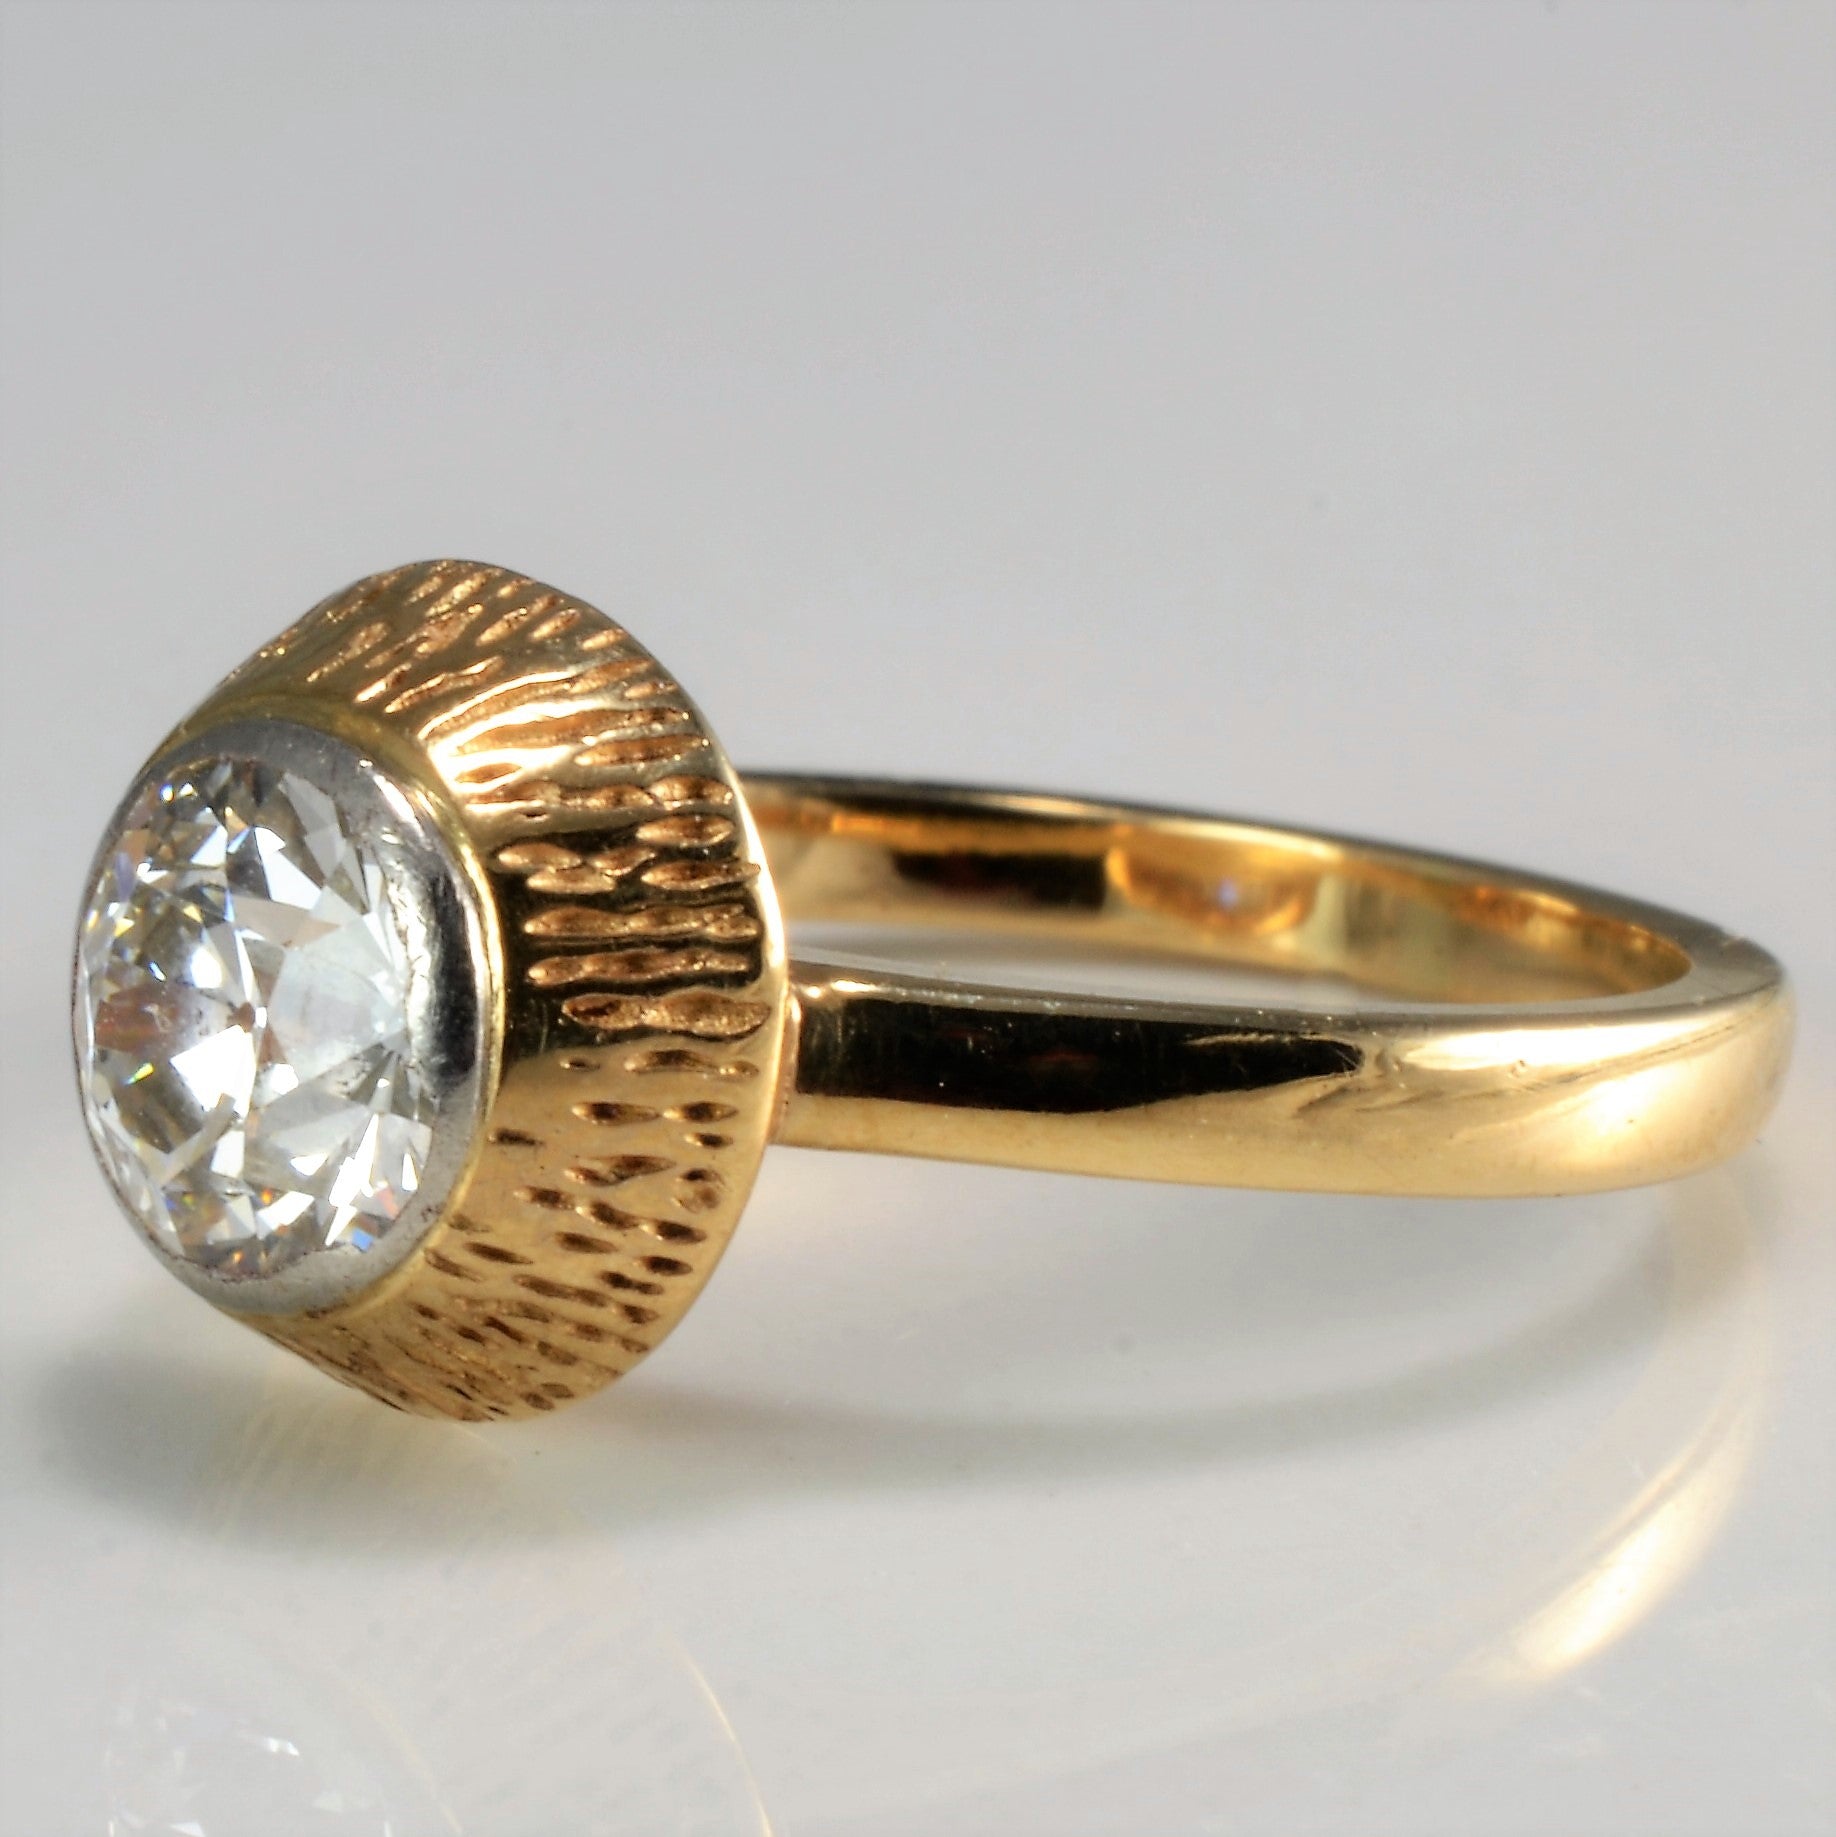 Gold Halo vintage diamond engagement ring in Canada